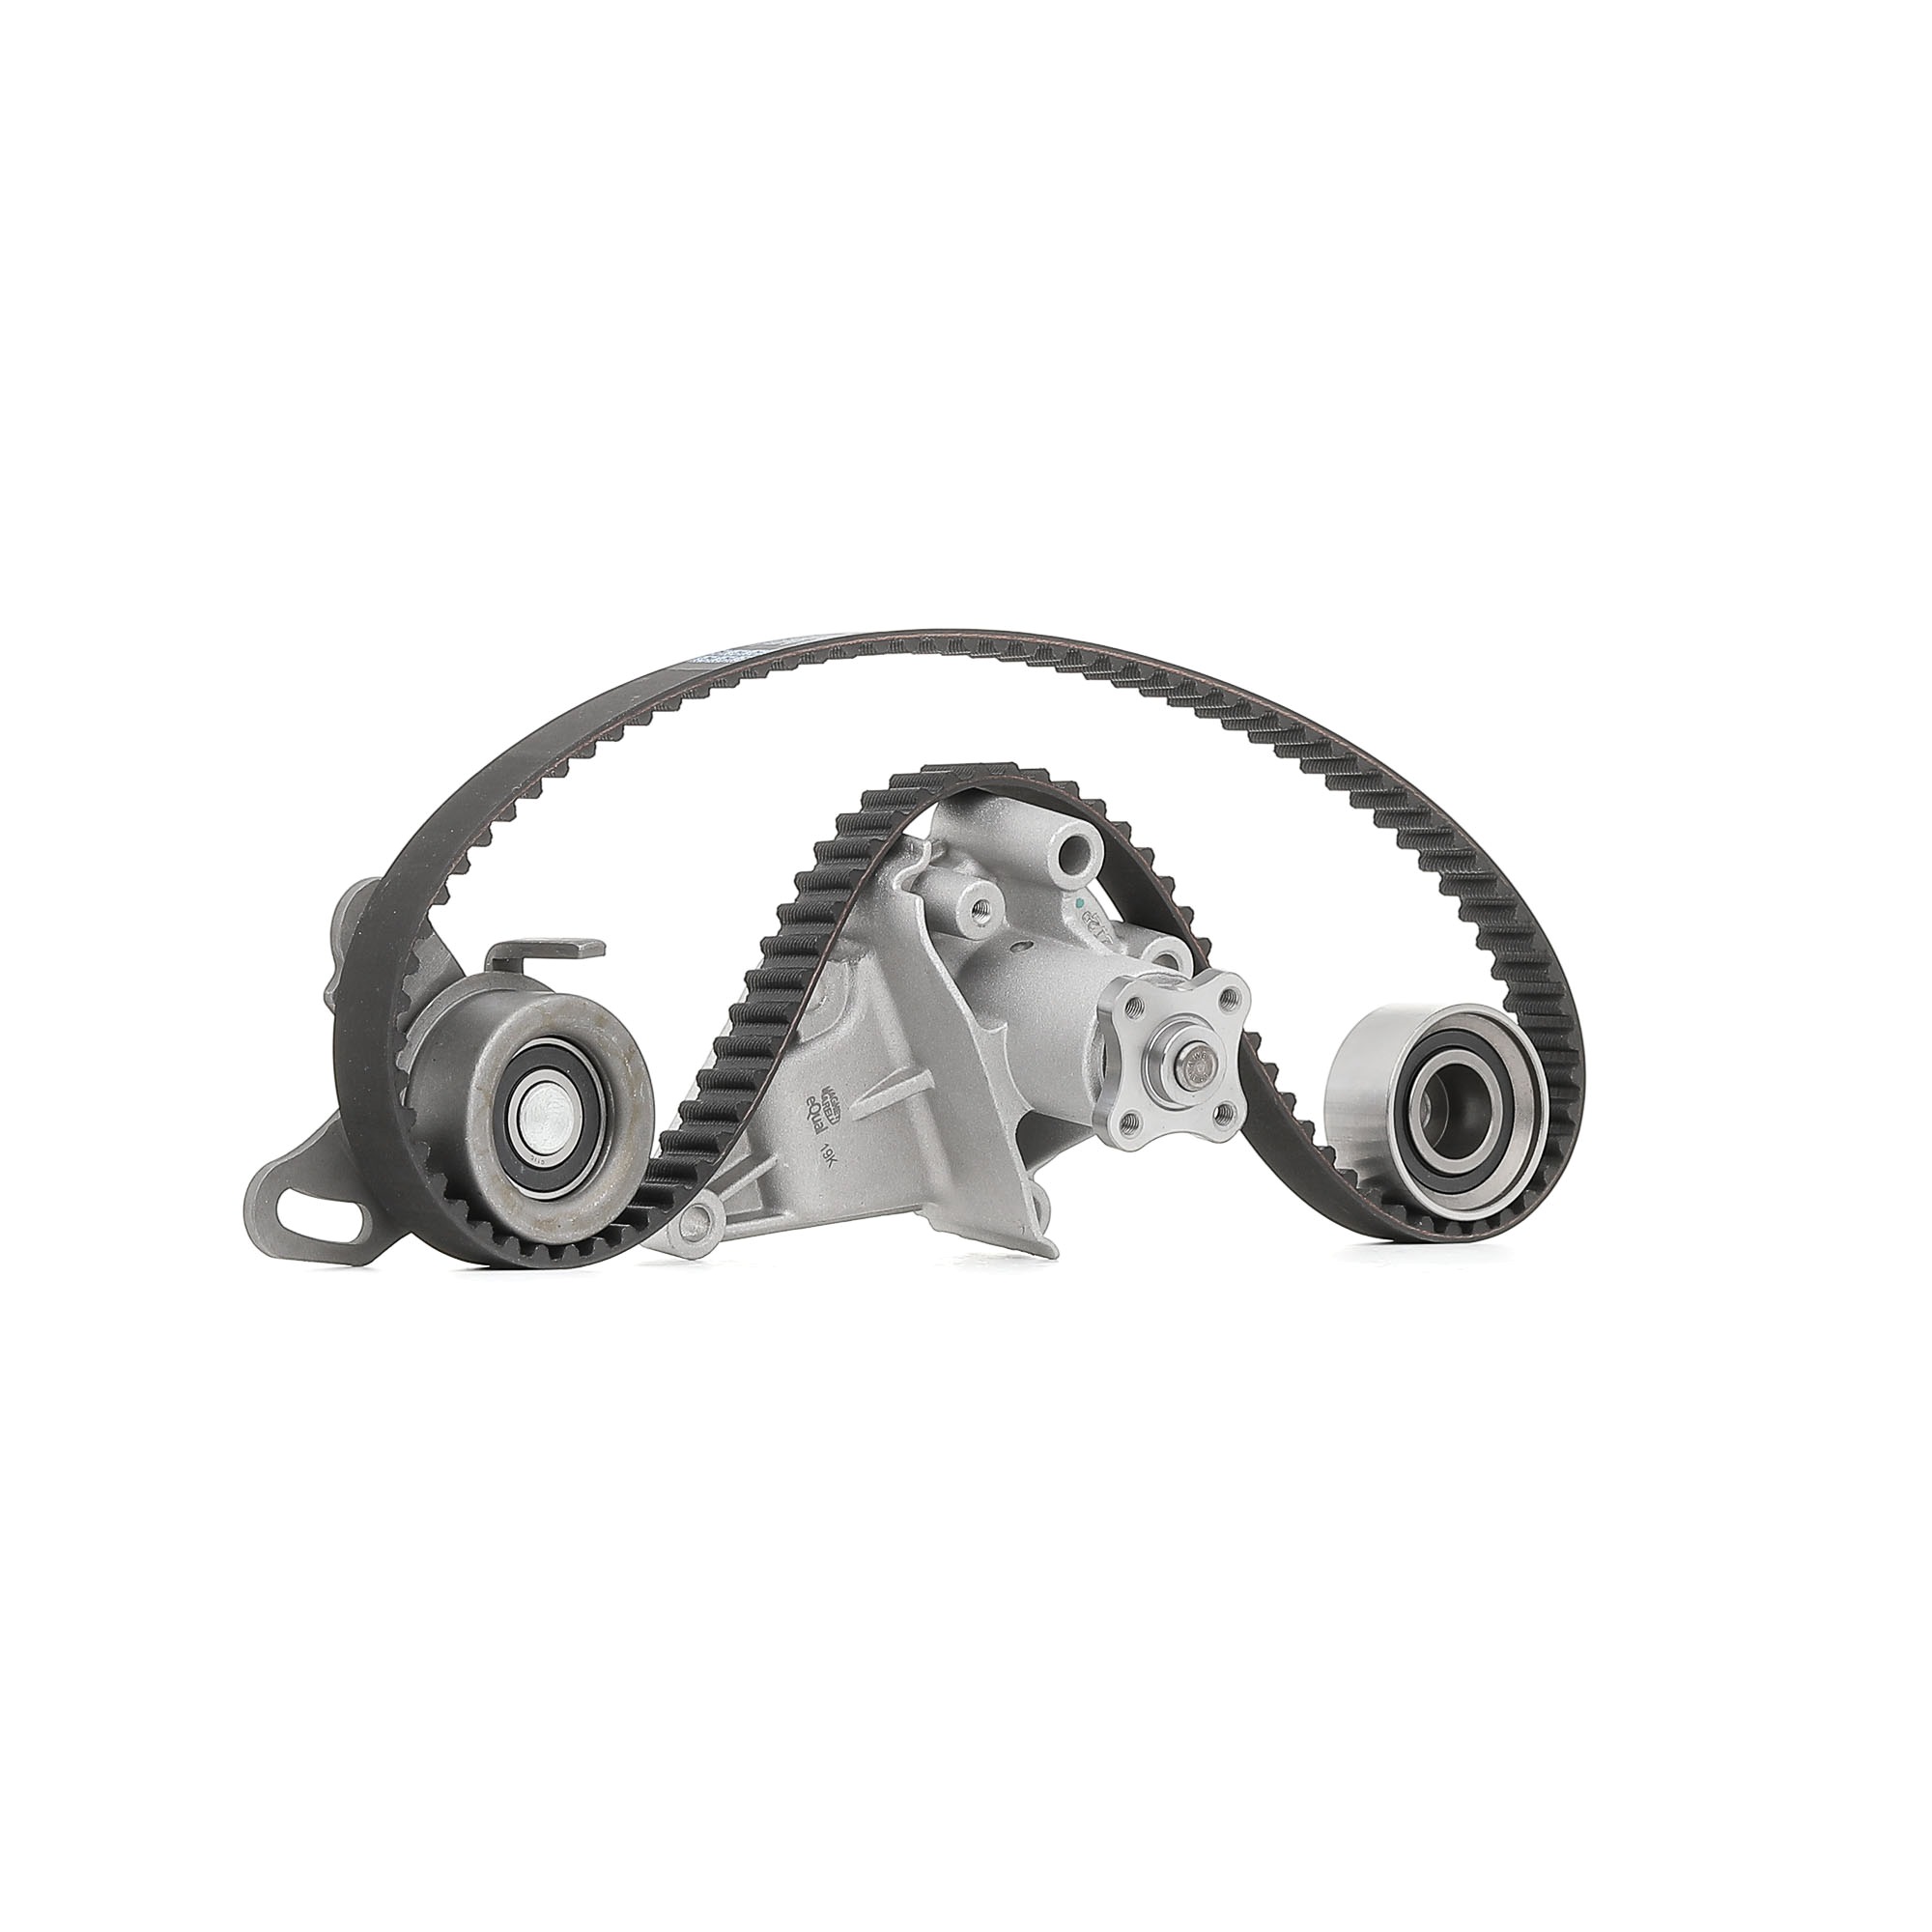 MAGNETI MARELLI 132011160066 Water pump and timing belt kit Number of Teeth: 105 L: 1000 mm, Width: 22 mm